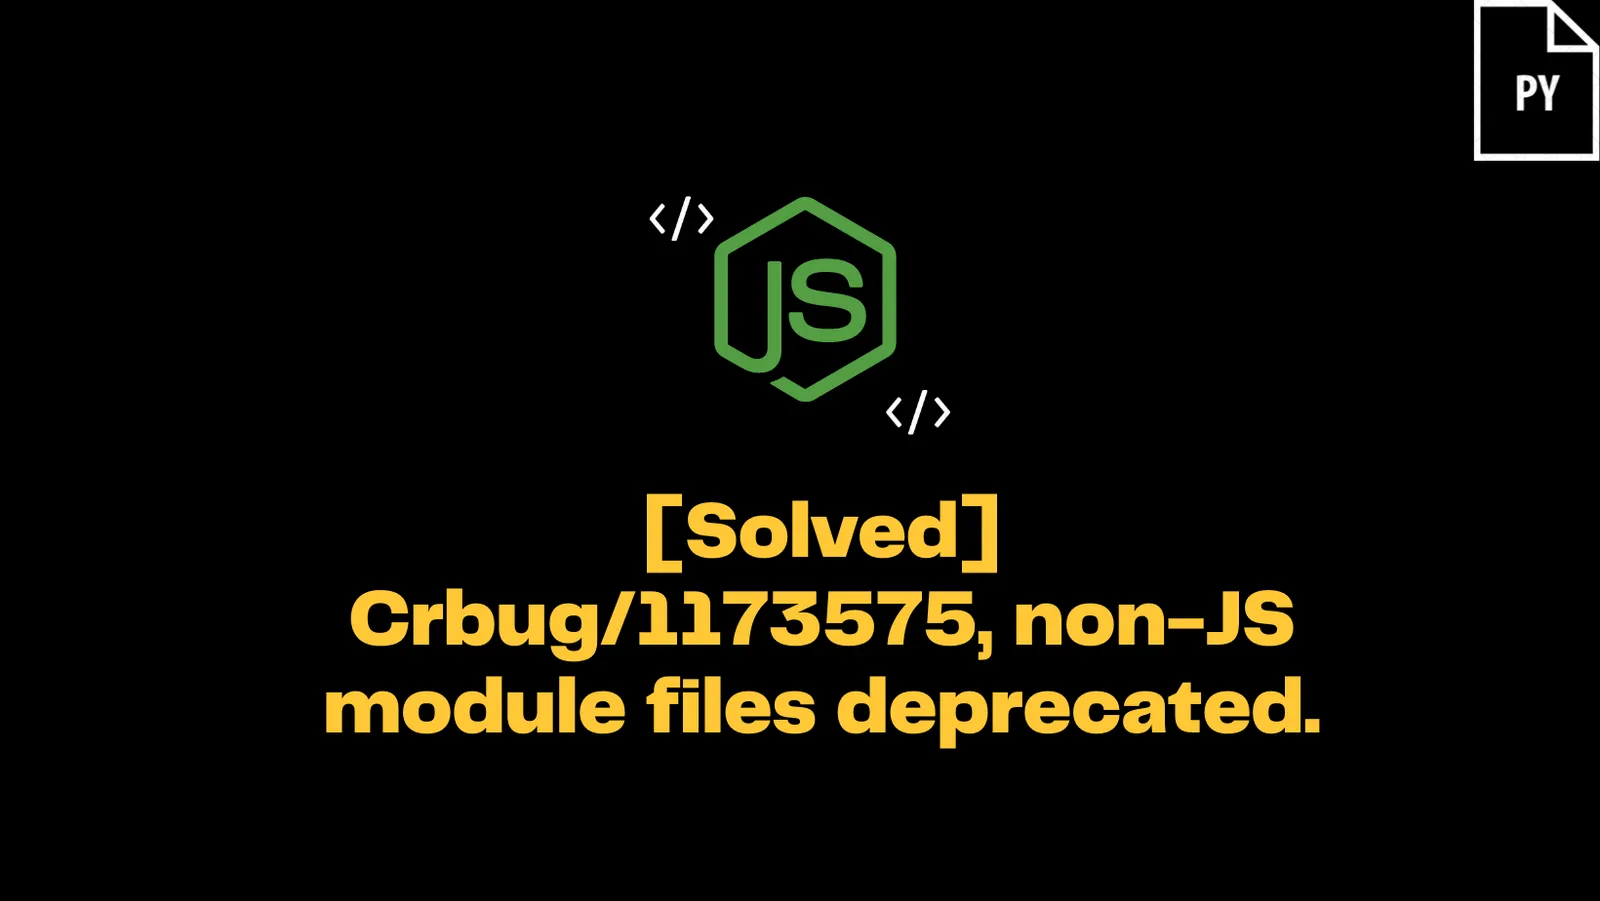 [Solved] Crbug/1173575, non-JS module files deprecated. - ItsMyCode